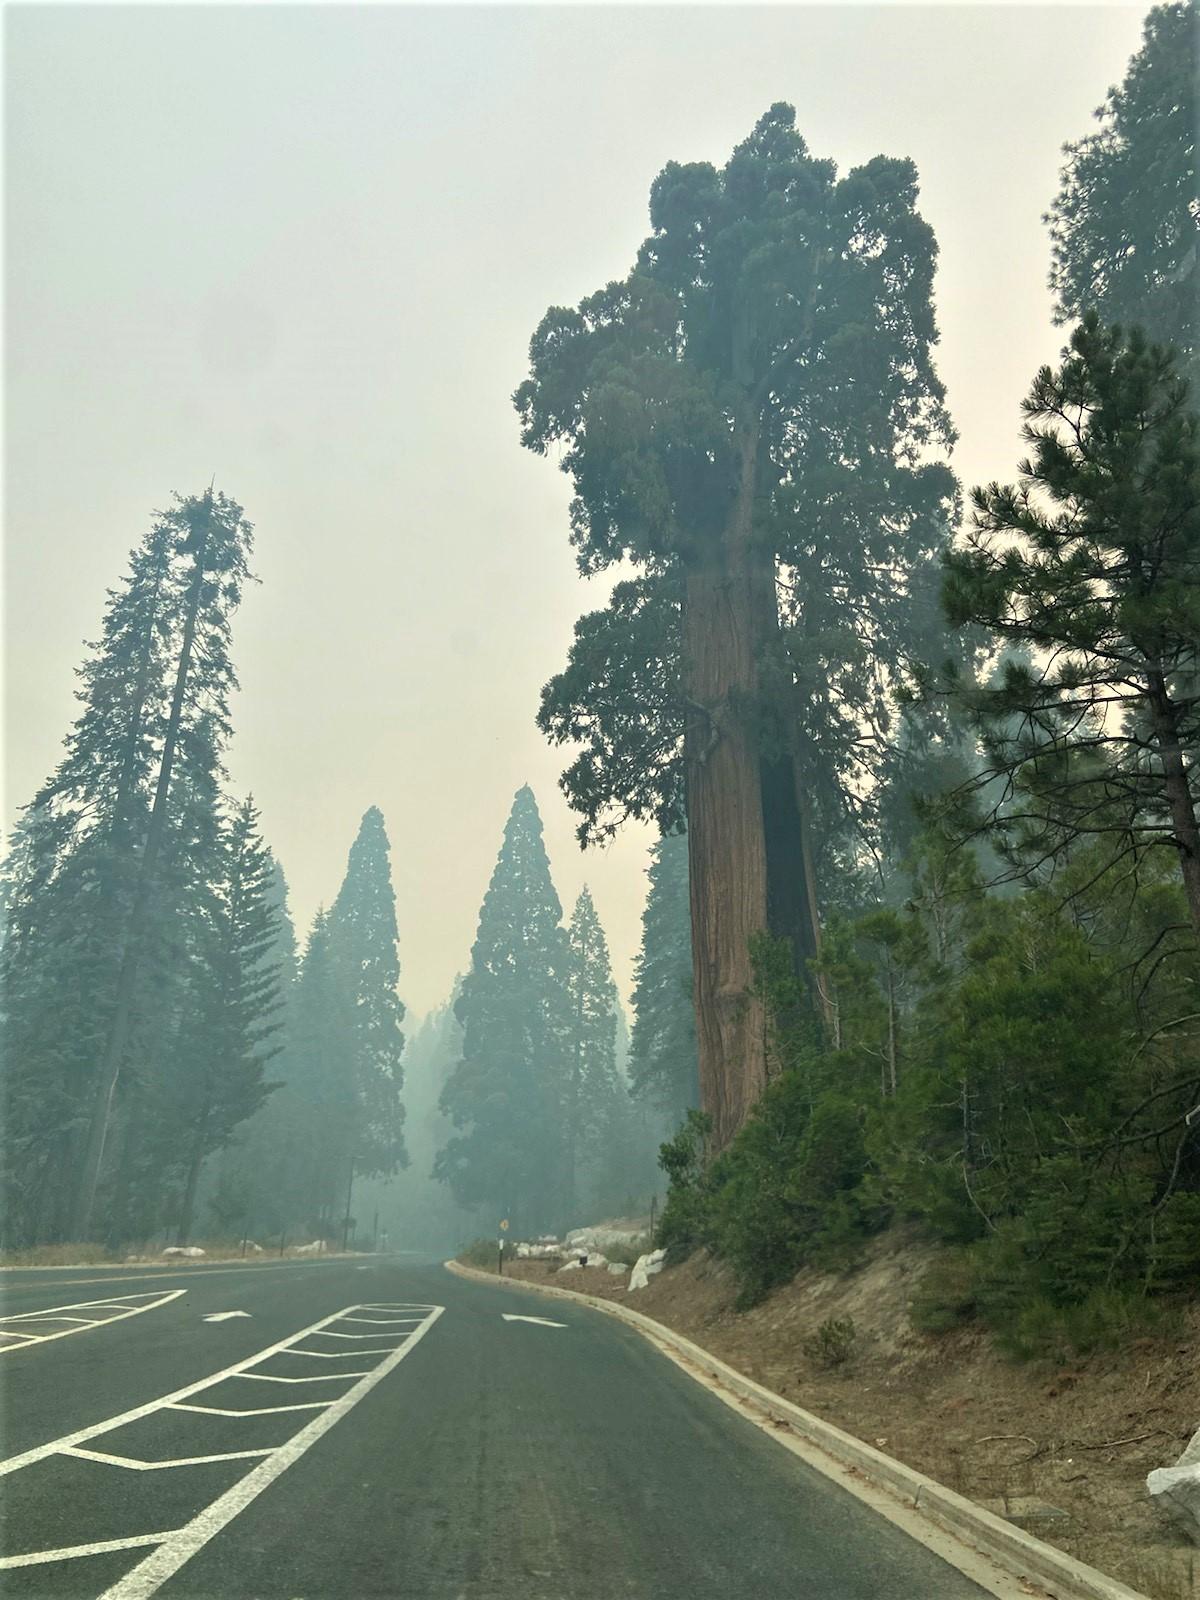 Kings Canyon National Park entrance with smoke and poor air quality.